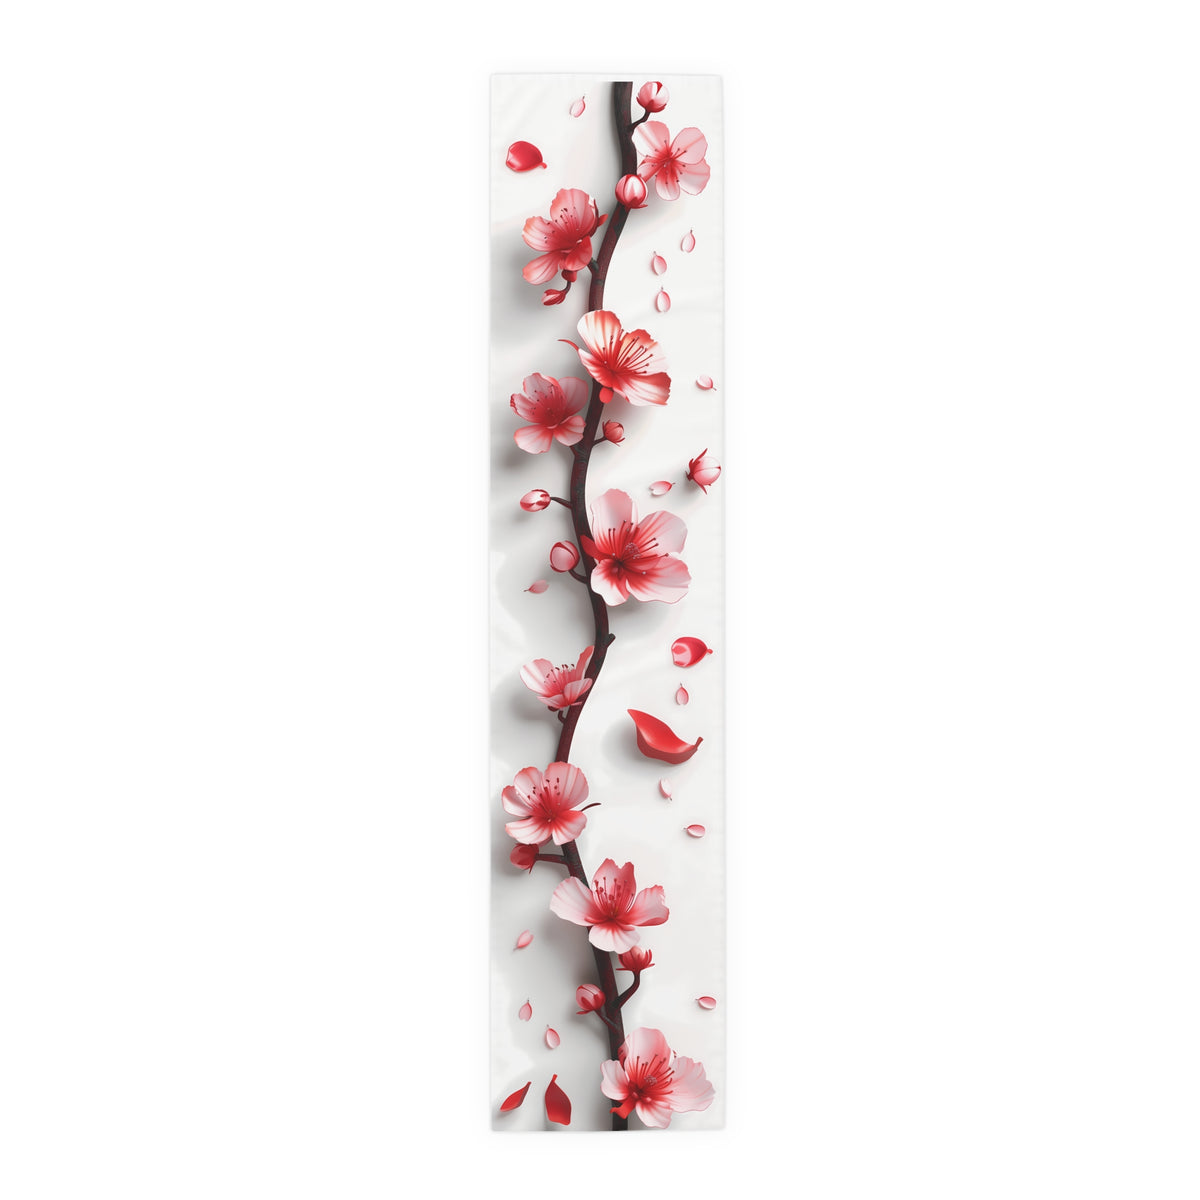 3D Table Runner with Pretty Plum Blossoms Design (16&quot; × 72&quot;)